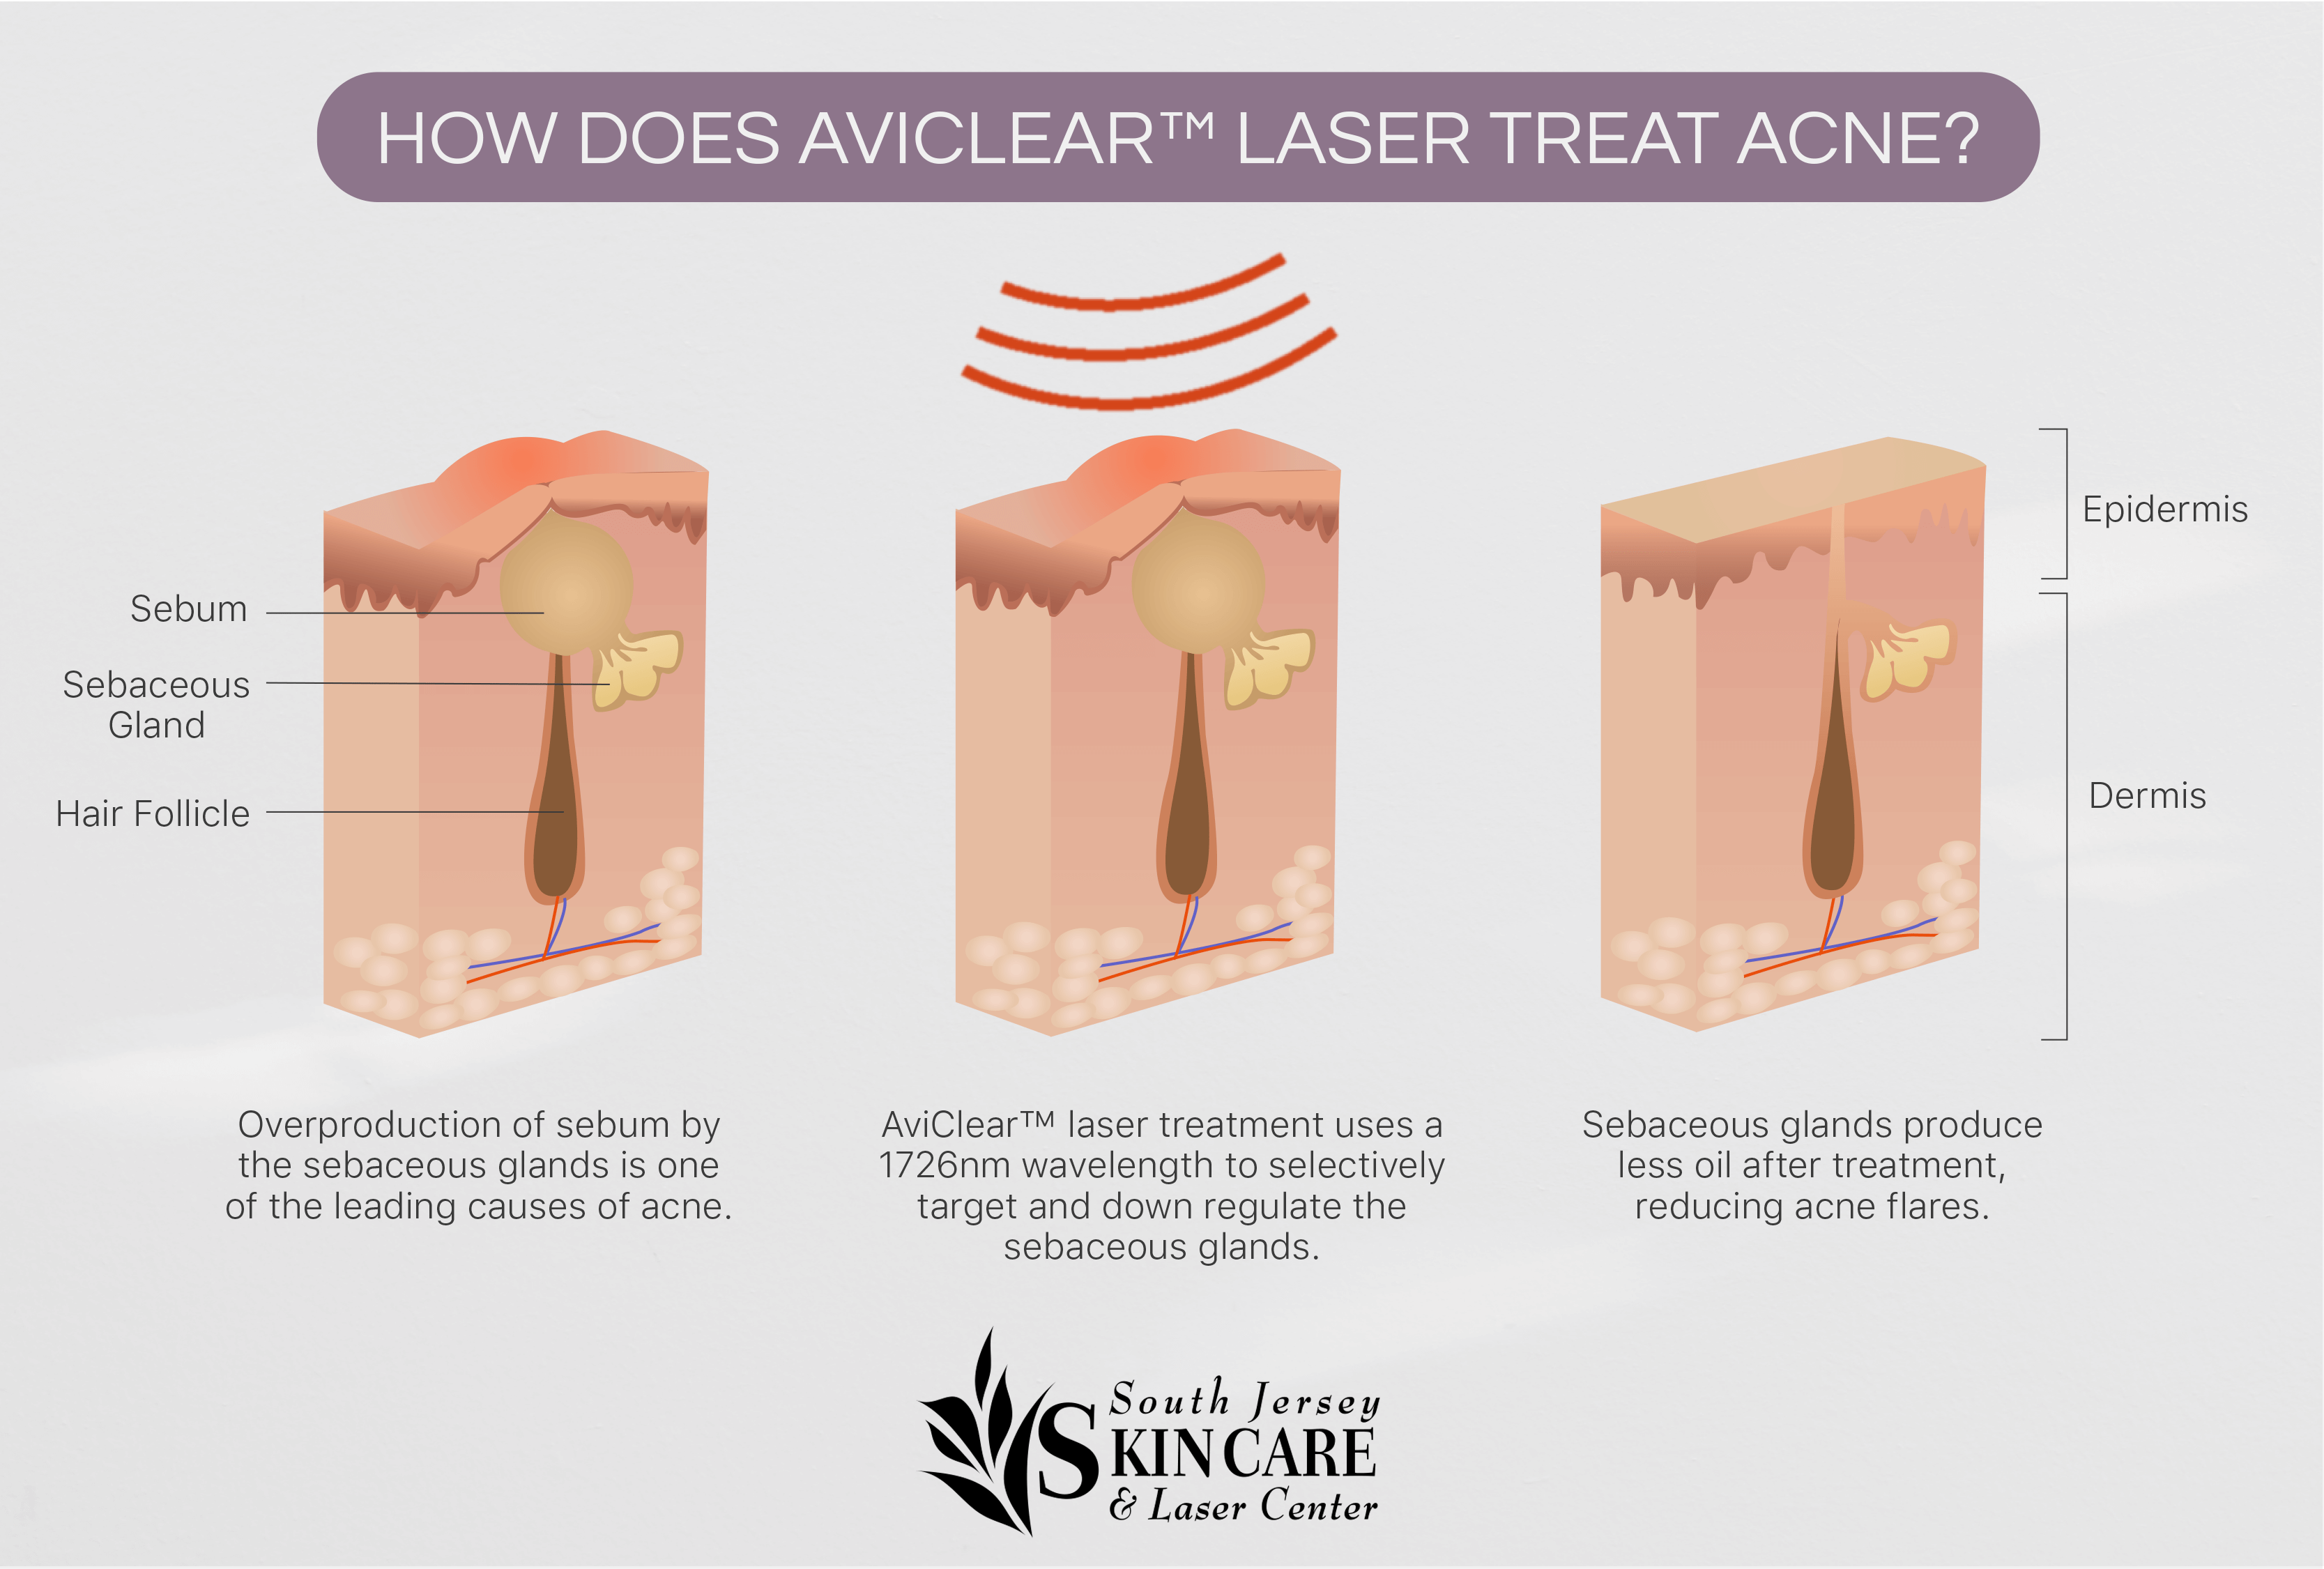 AviClear is a laser-based, oil-reducing acne treatment at South Jersey Skin Care & Laser Center.